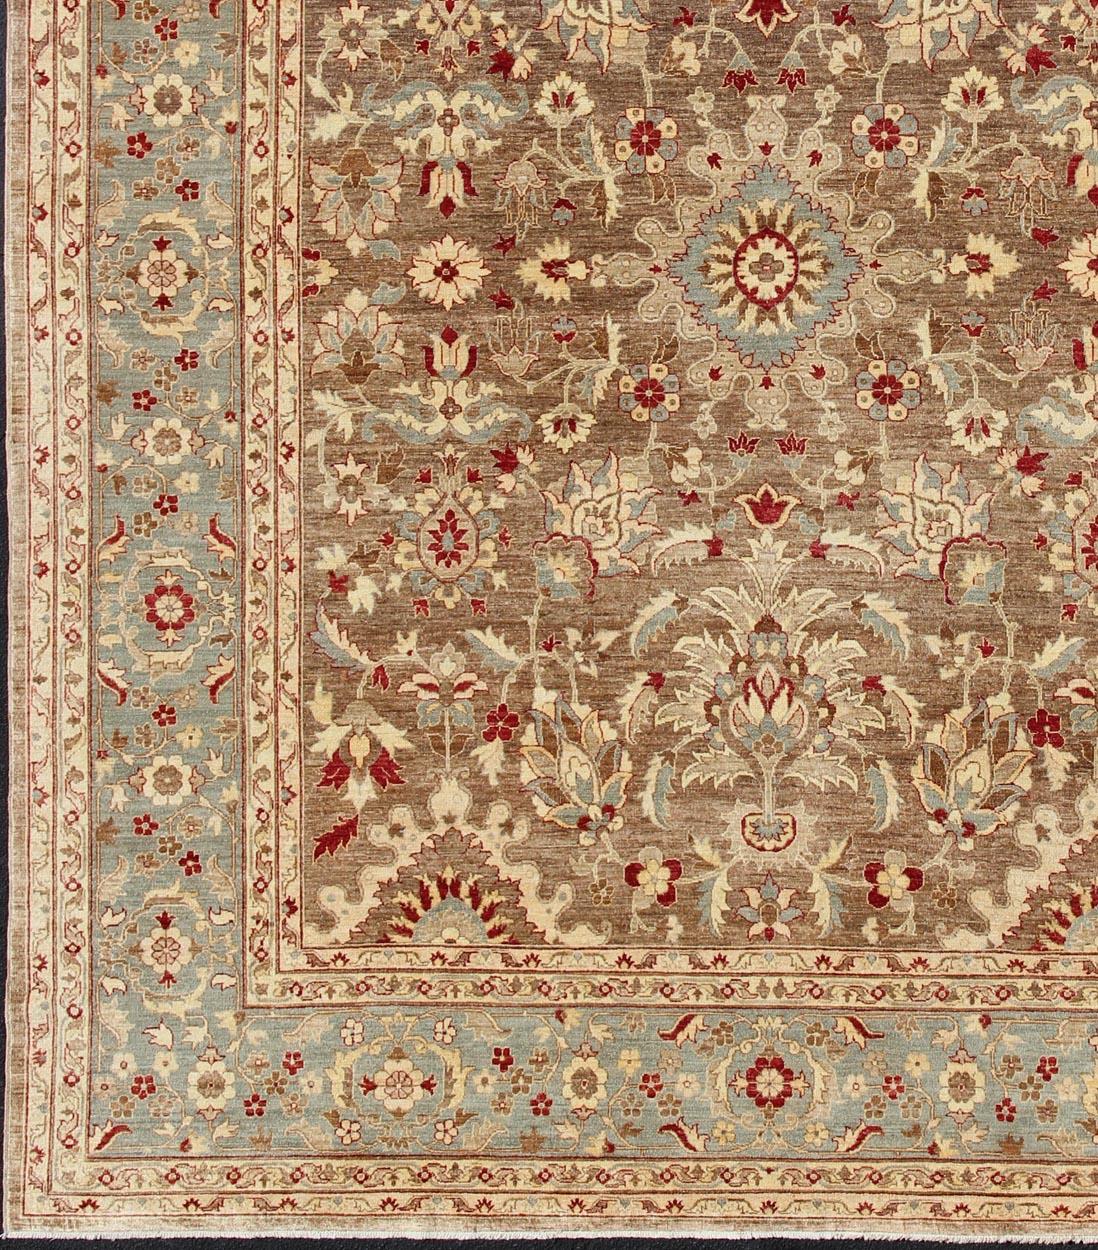 Large Sultanabad Design rug, rug 16-0307, country of origin / type: Afghanistan / Sultanabad

Measures: 11'10 x 14'9.

This Sultanabad design rug from Afghanistan features an elaborate traditional design rendered in tones of brown, red, taupe, and